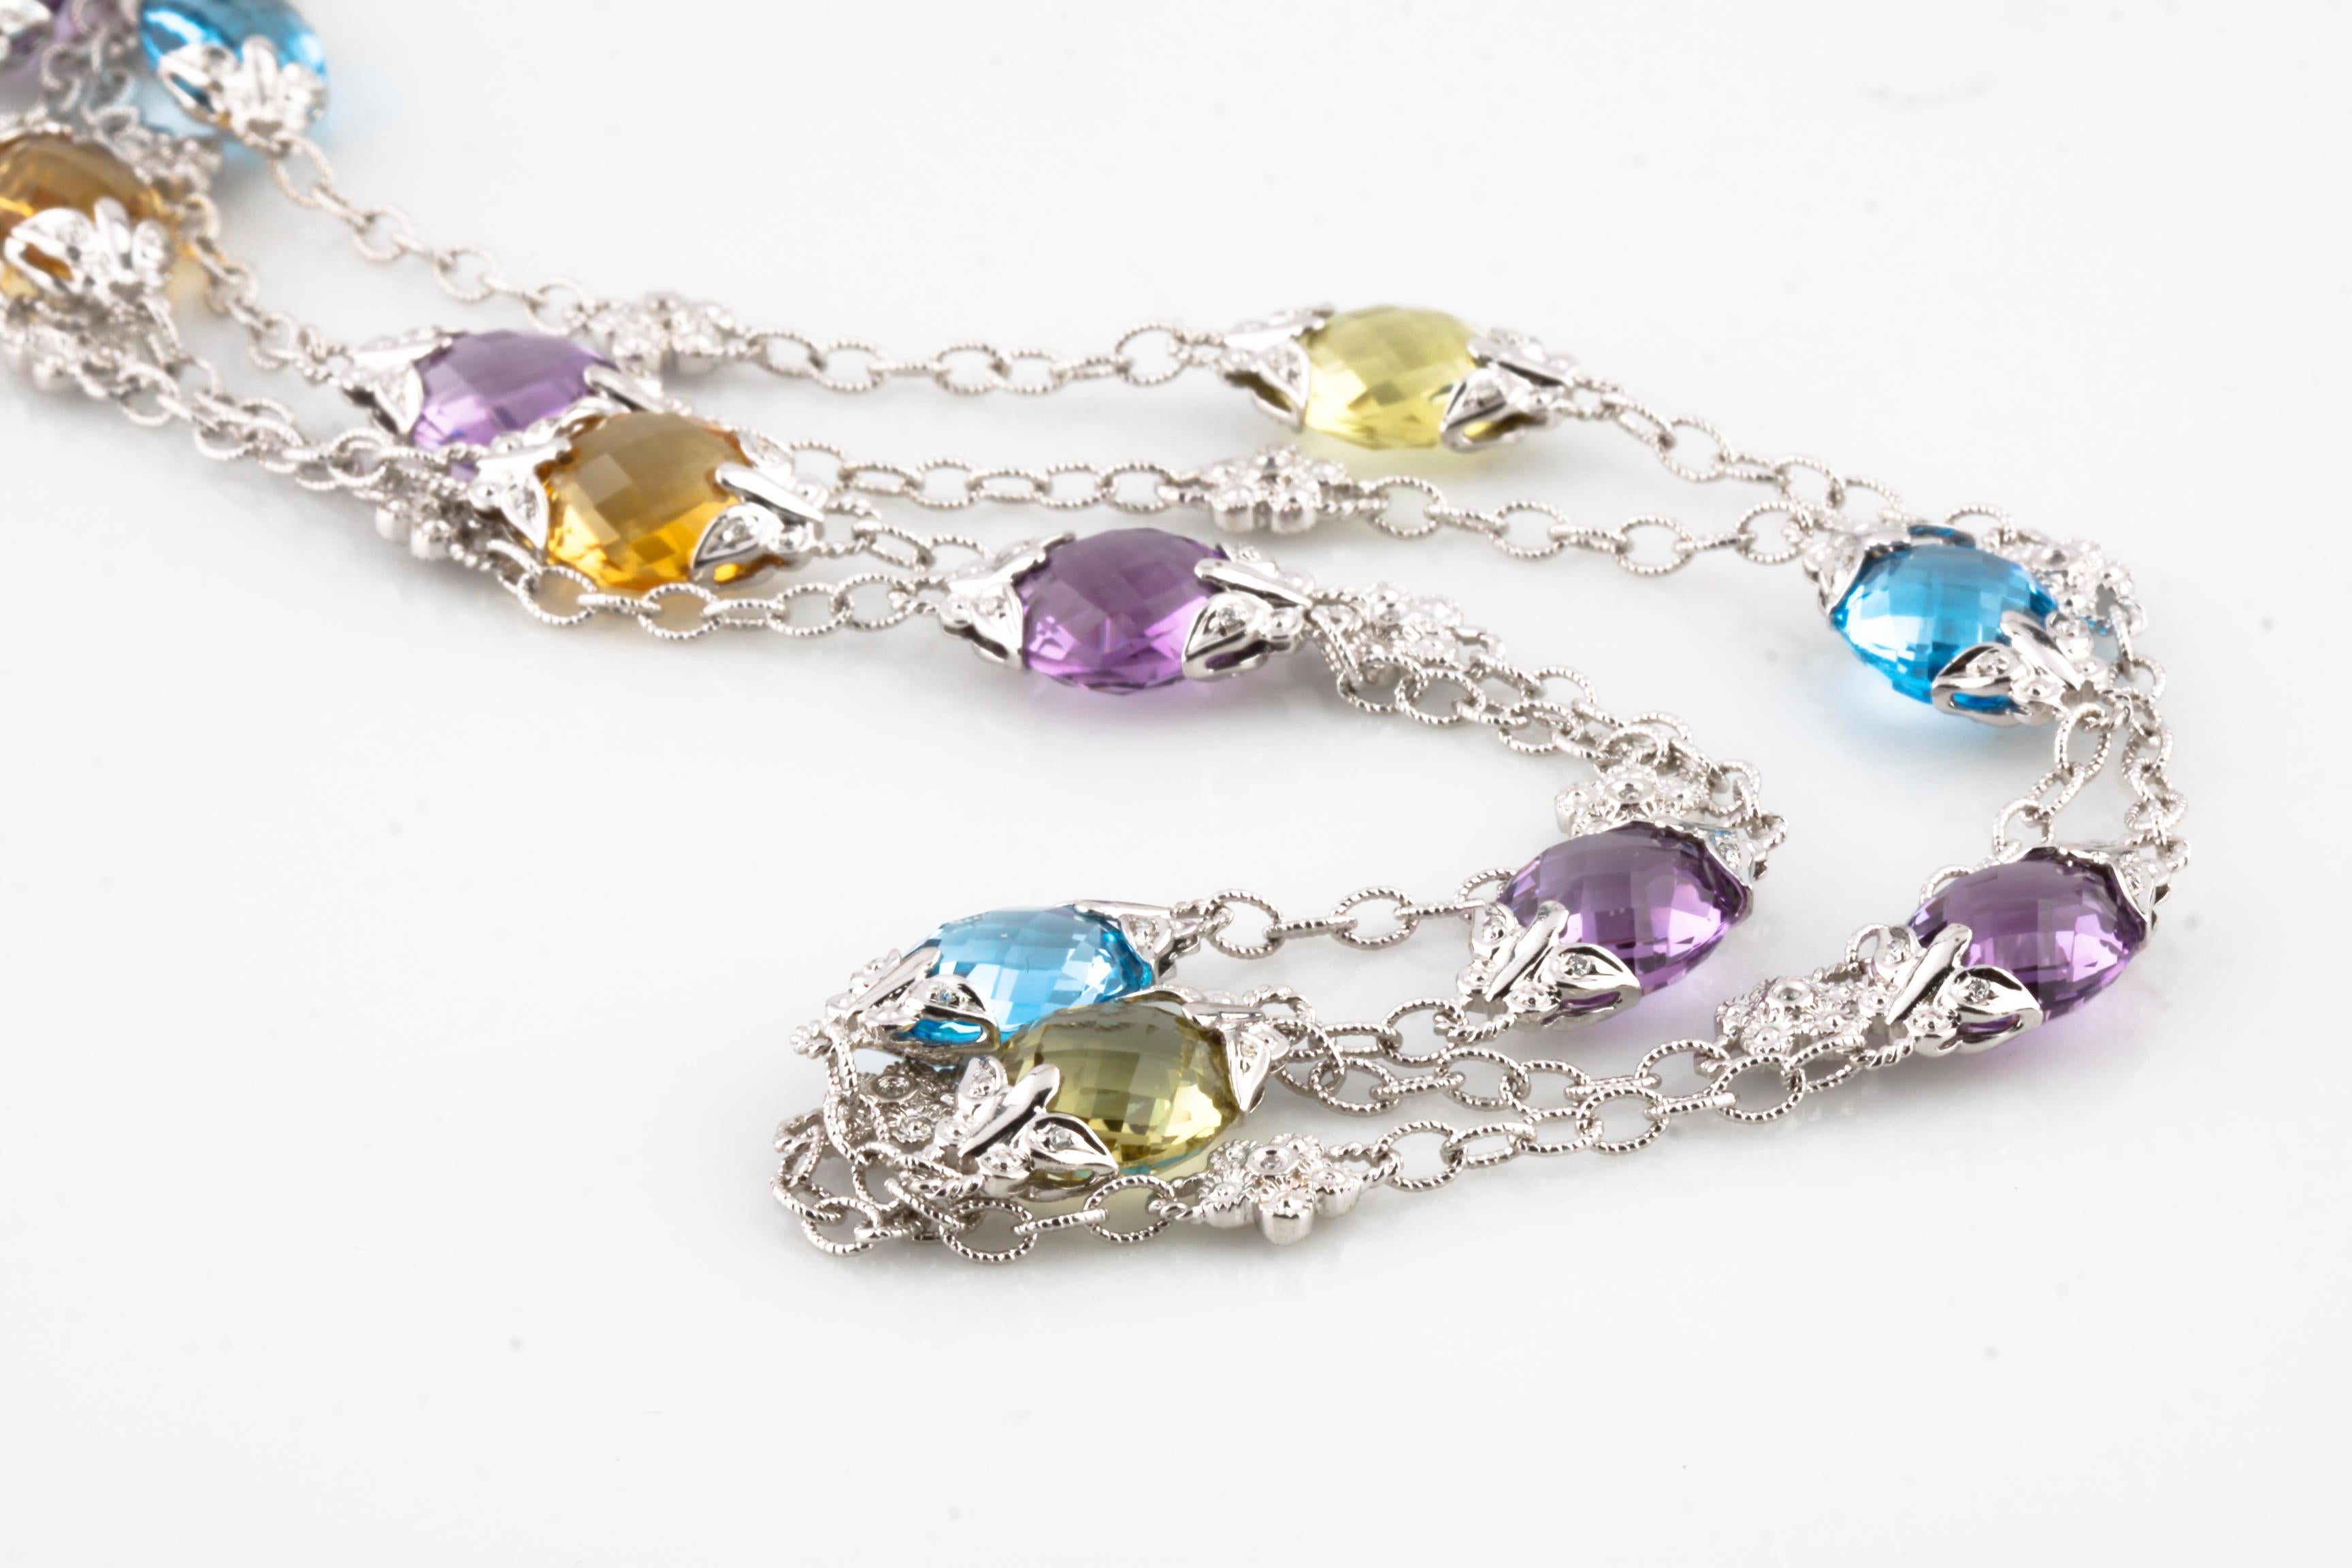 Amazing, Unique 14k White Gold Chain Necklace
Features Amber, Blue, and Lilac-Colored Briolette-Cut Topaz in Alternating Pattern w/ Flower-Shaped Stations Set with a Round-Cut Diamond.
Each Briolette Station is Set with Eight Small Round-Cut